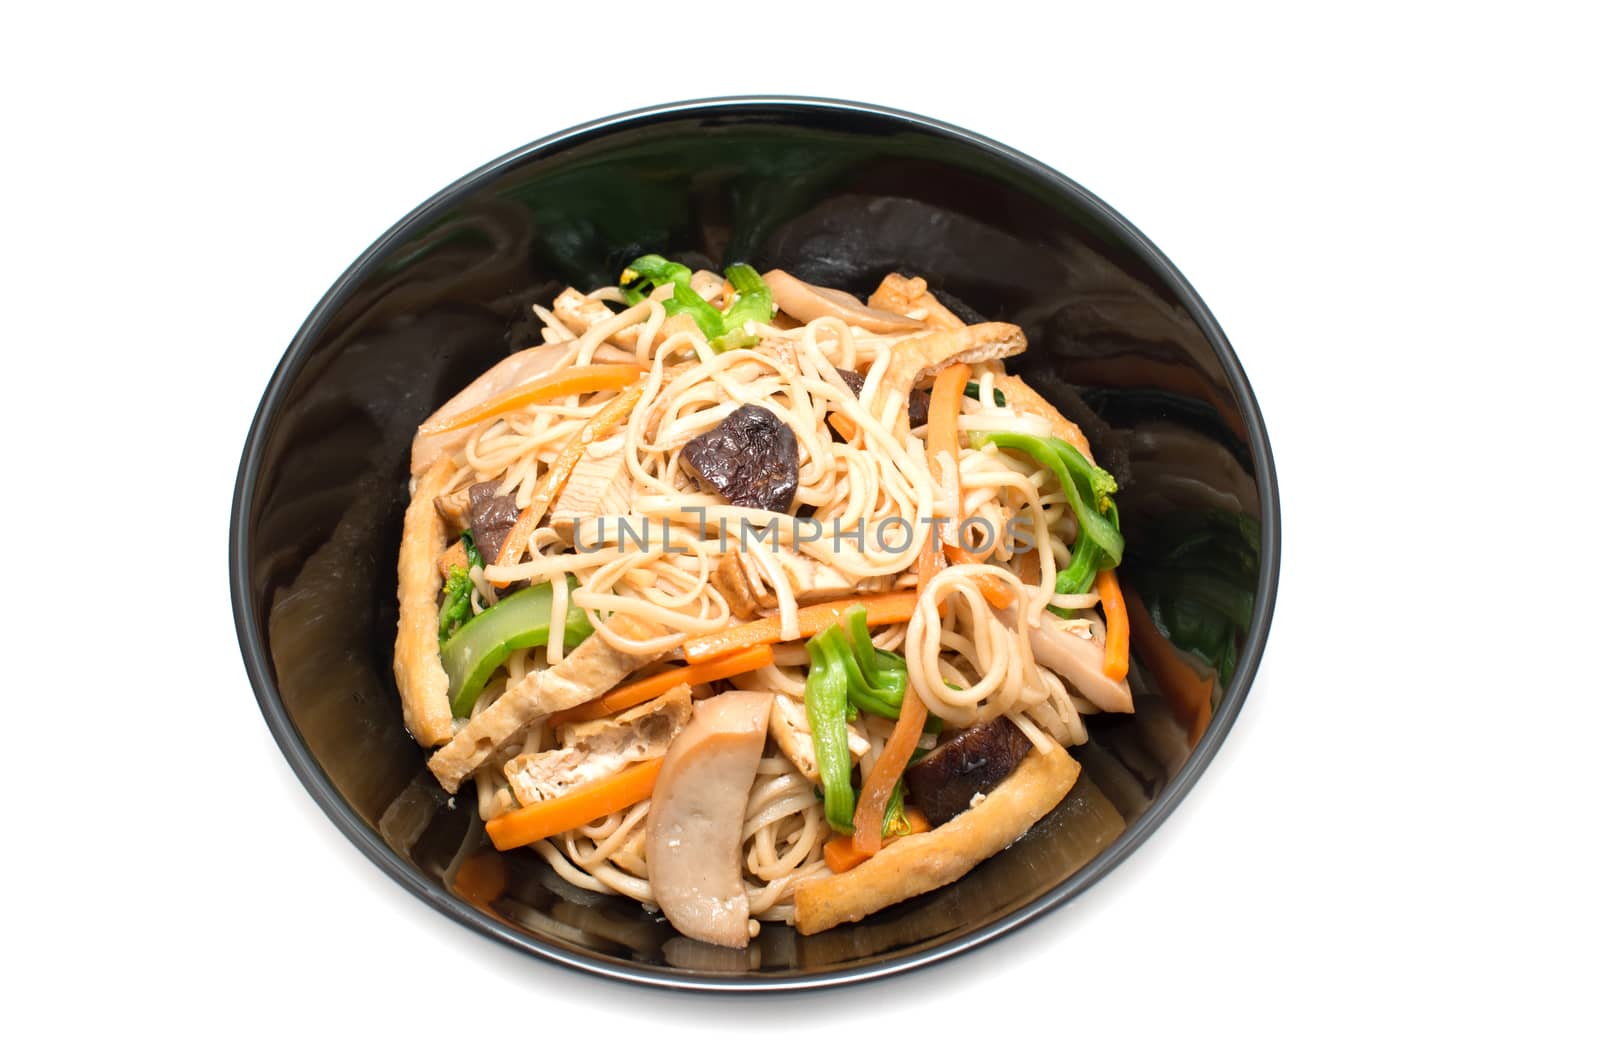 Vegetarian stir fry noodle plate on white background